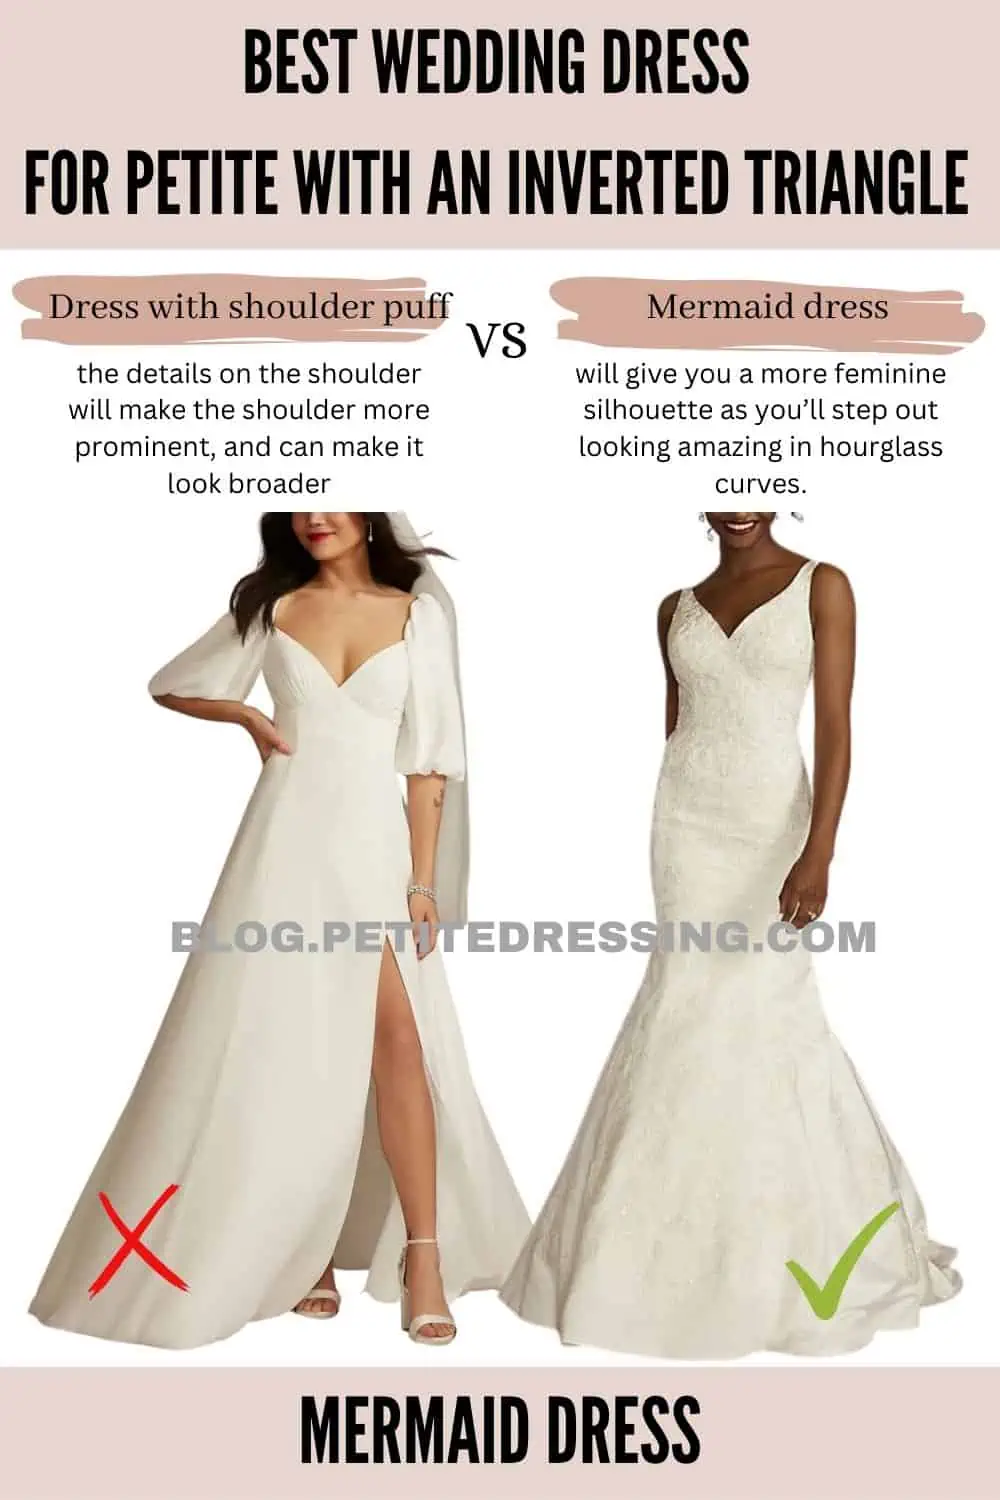 Inverted triangle shapes need look no further for great wedding dress  styles. #wedding #dresses